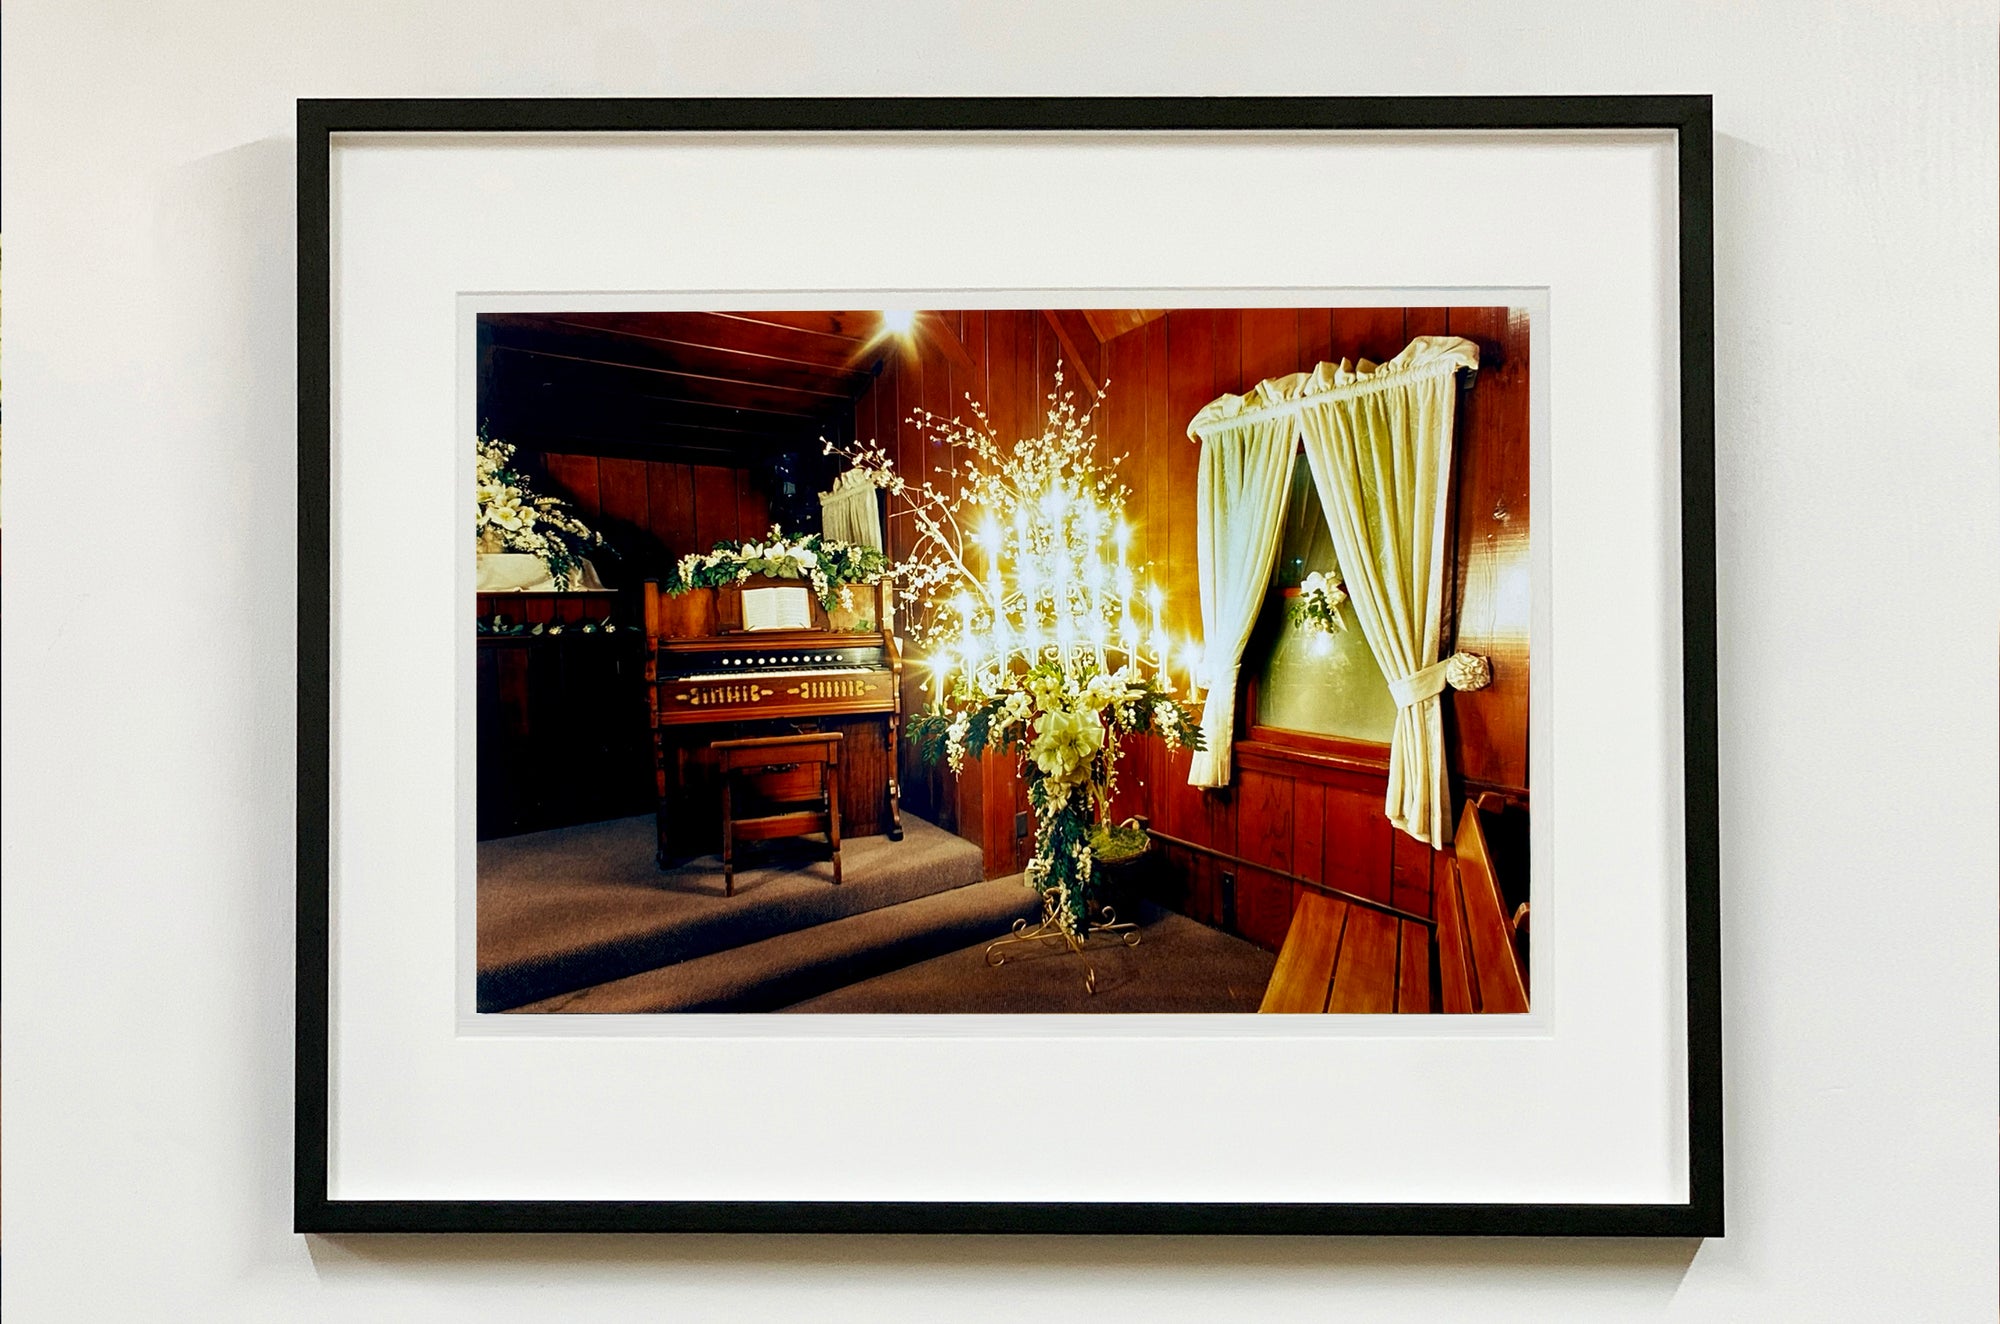 This piece shows the interior of the iconic Little Chapel of the West, where Elvis married in Viva Las Vegas. It is the oldest building on the Las Vegas Strip, and in the past sixty years has hosted many (in some cases short lived) celebrity weddings.